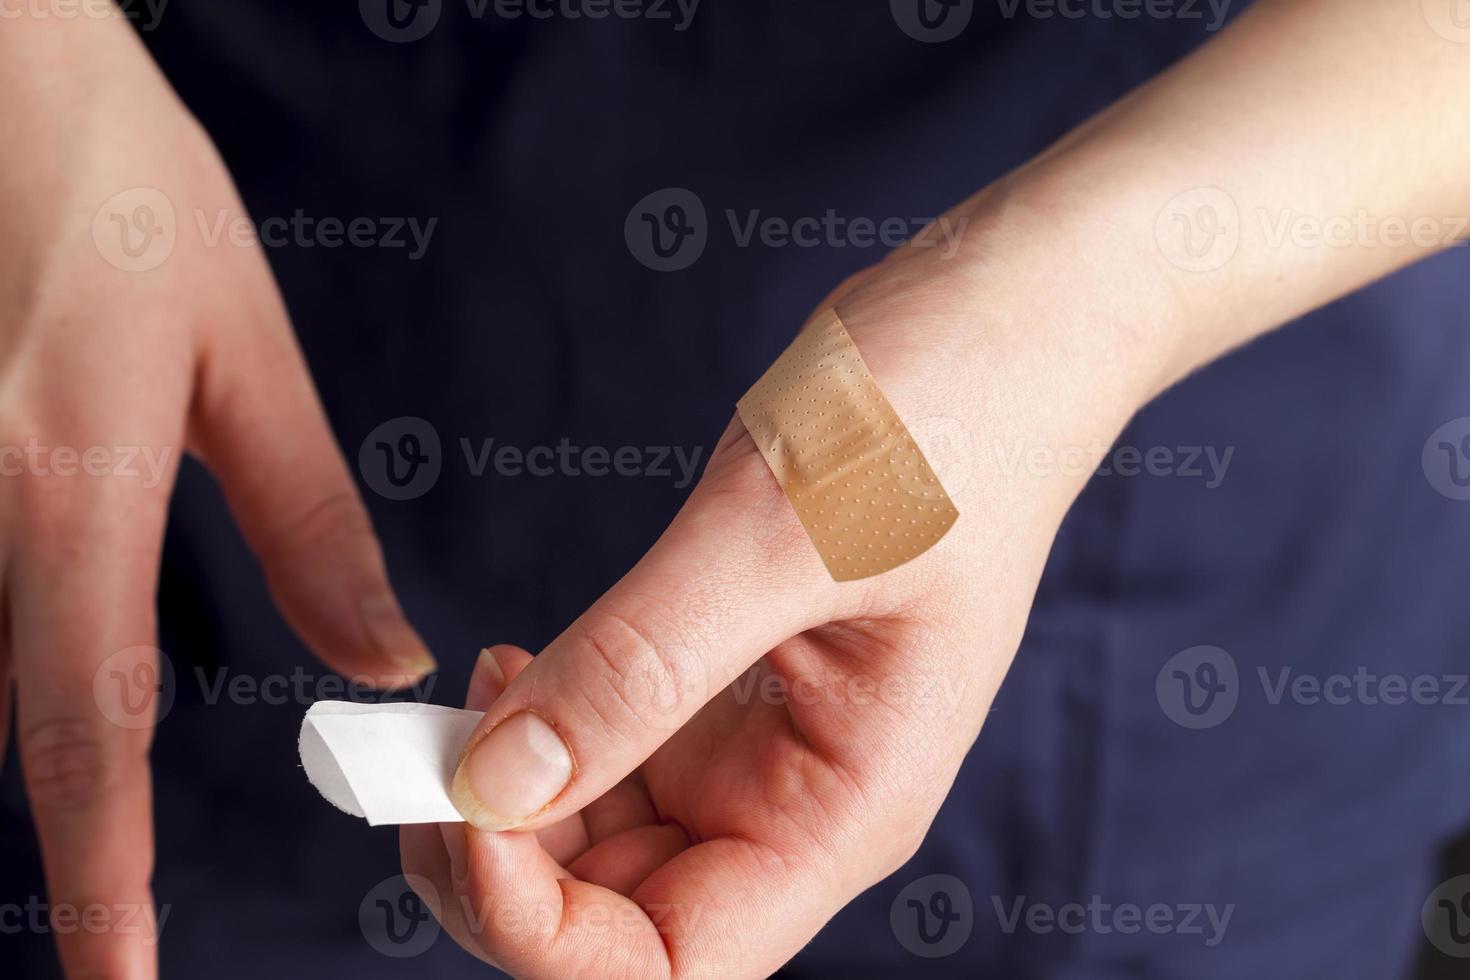 a woman in medical clothing puts a band on her hand photo